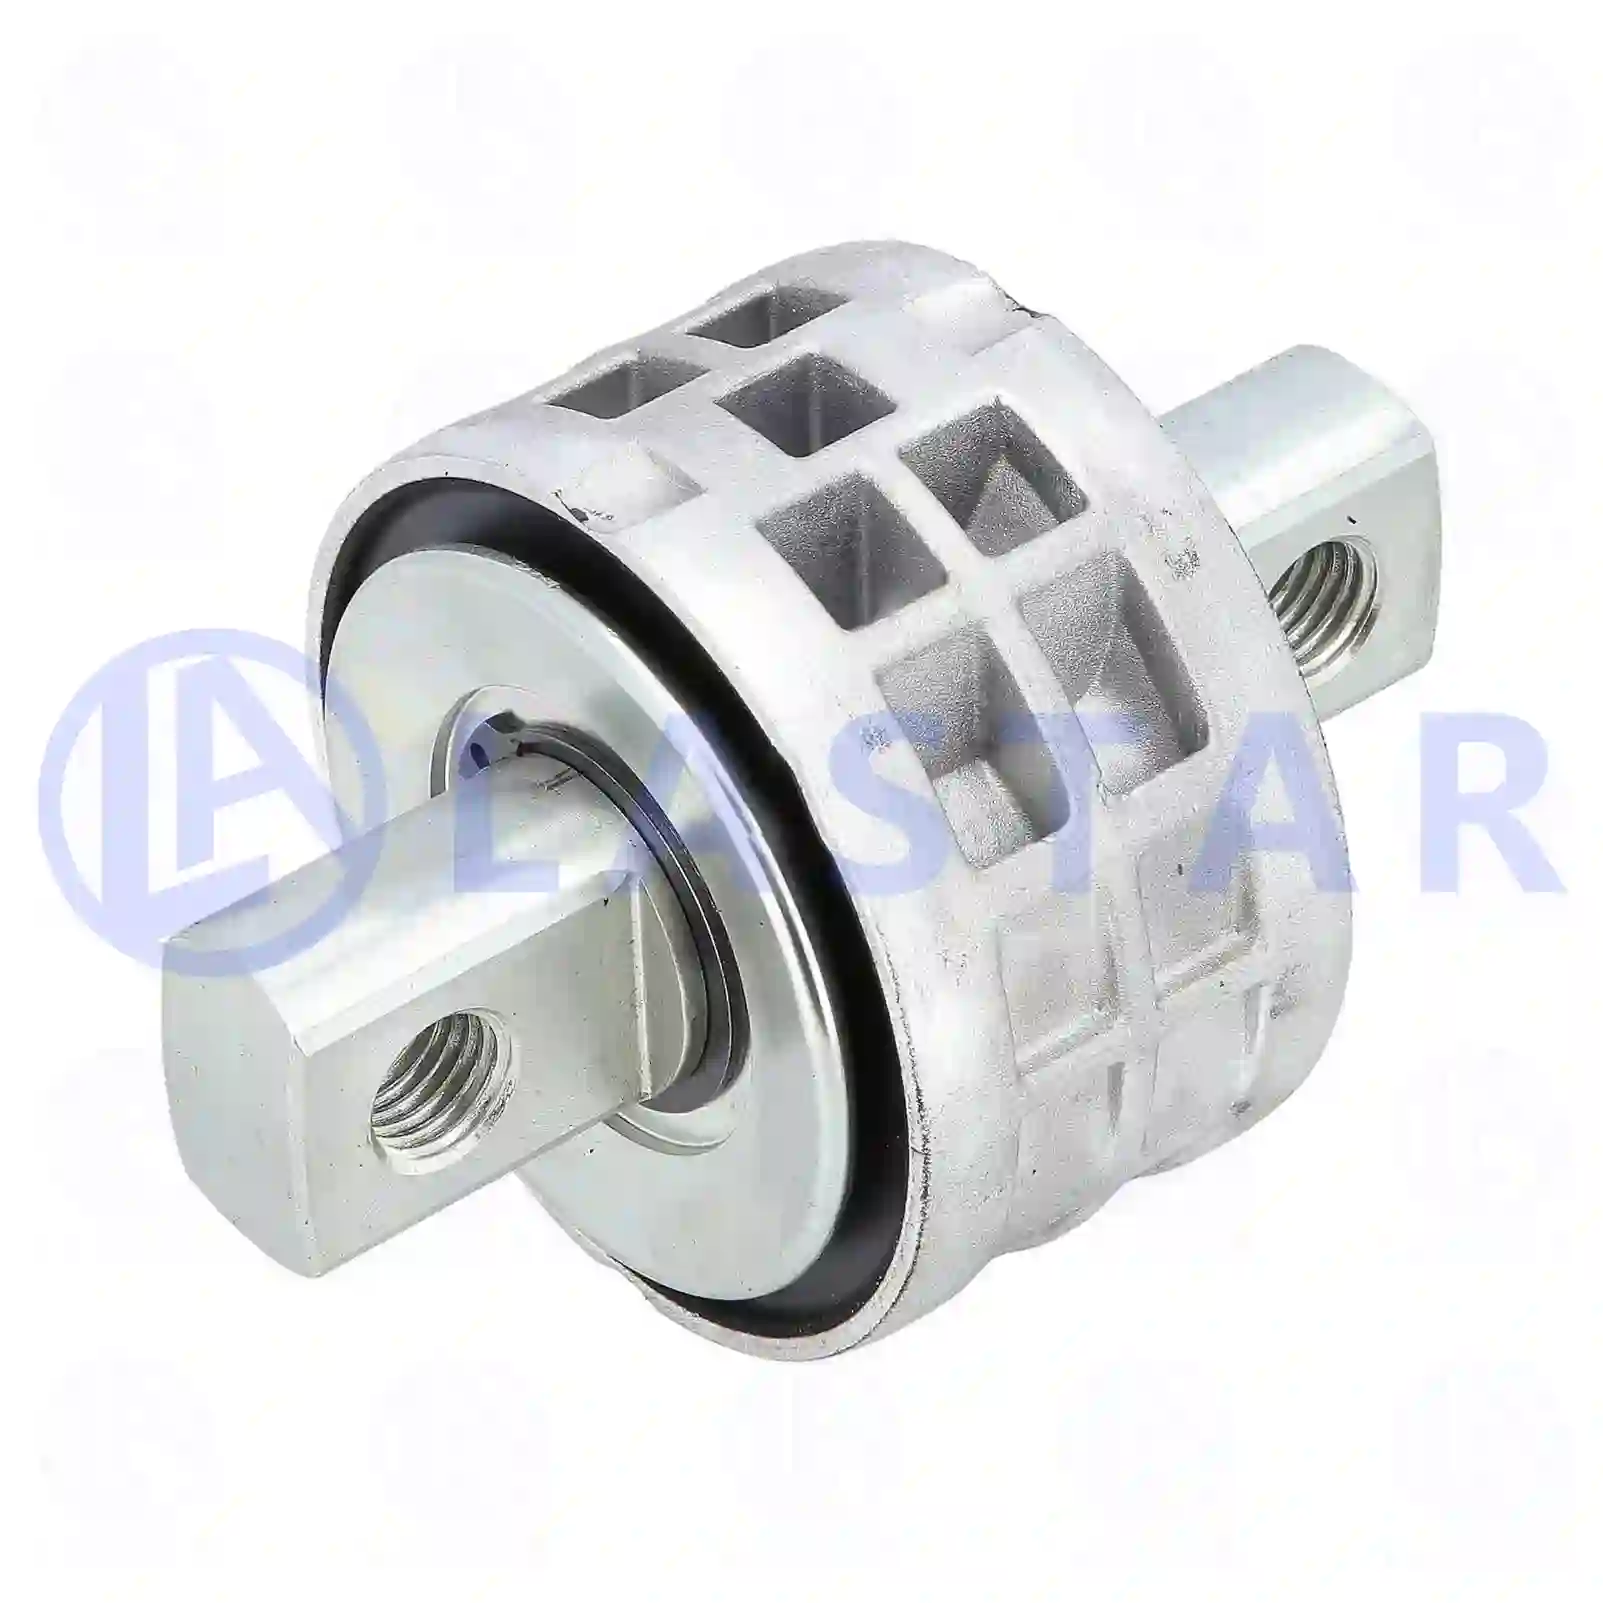 Bushing, stabilizer, 77735254, 1911932 ||  77735254 Lastar Spare Part | Truck Spare Parts, Auotomotive Spare Parts Bushing, stabilizer, 77735254, 1911932 ||  77735254 Lastar Spare Part | Truck Spare Parts, Auotomotive Spare Parts